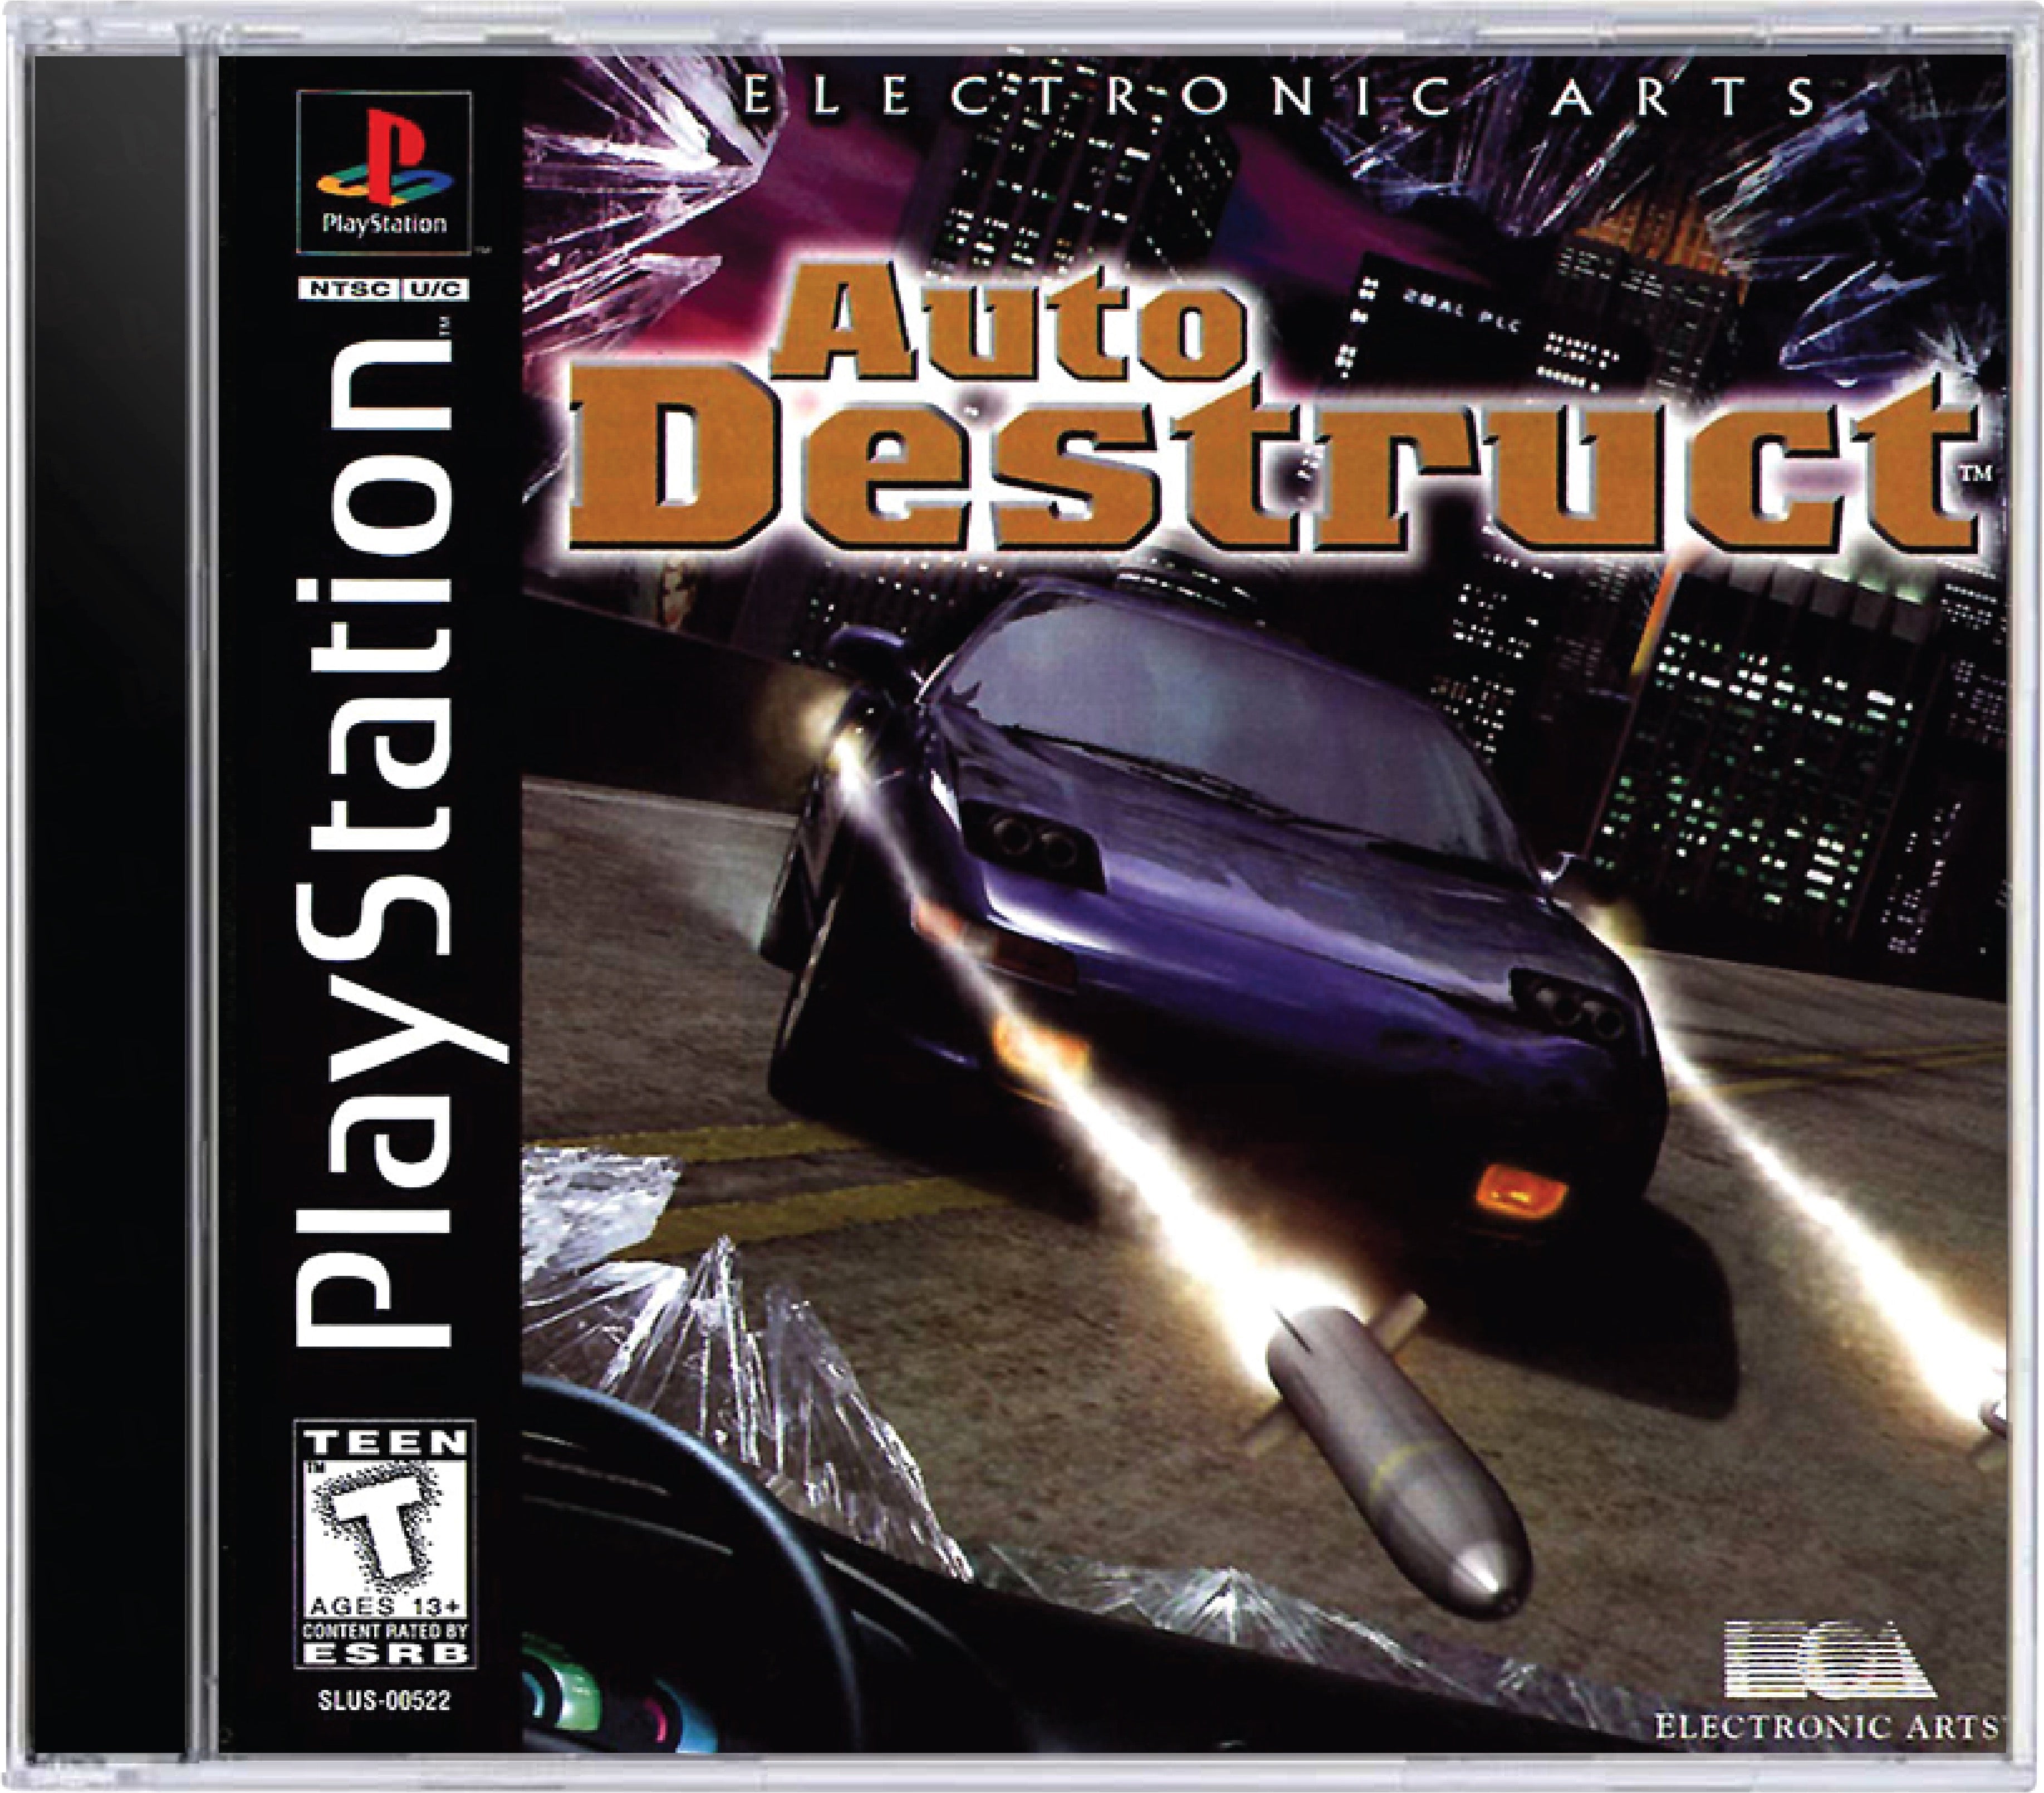 Auto Destruct Cover Art and Product Photo